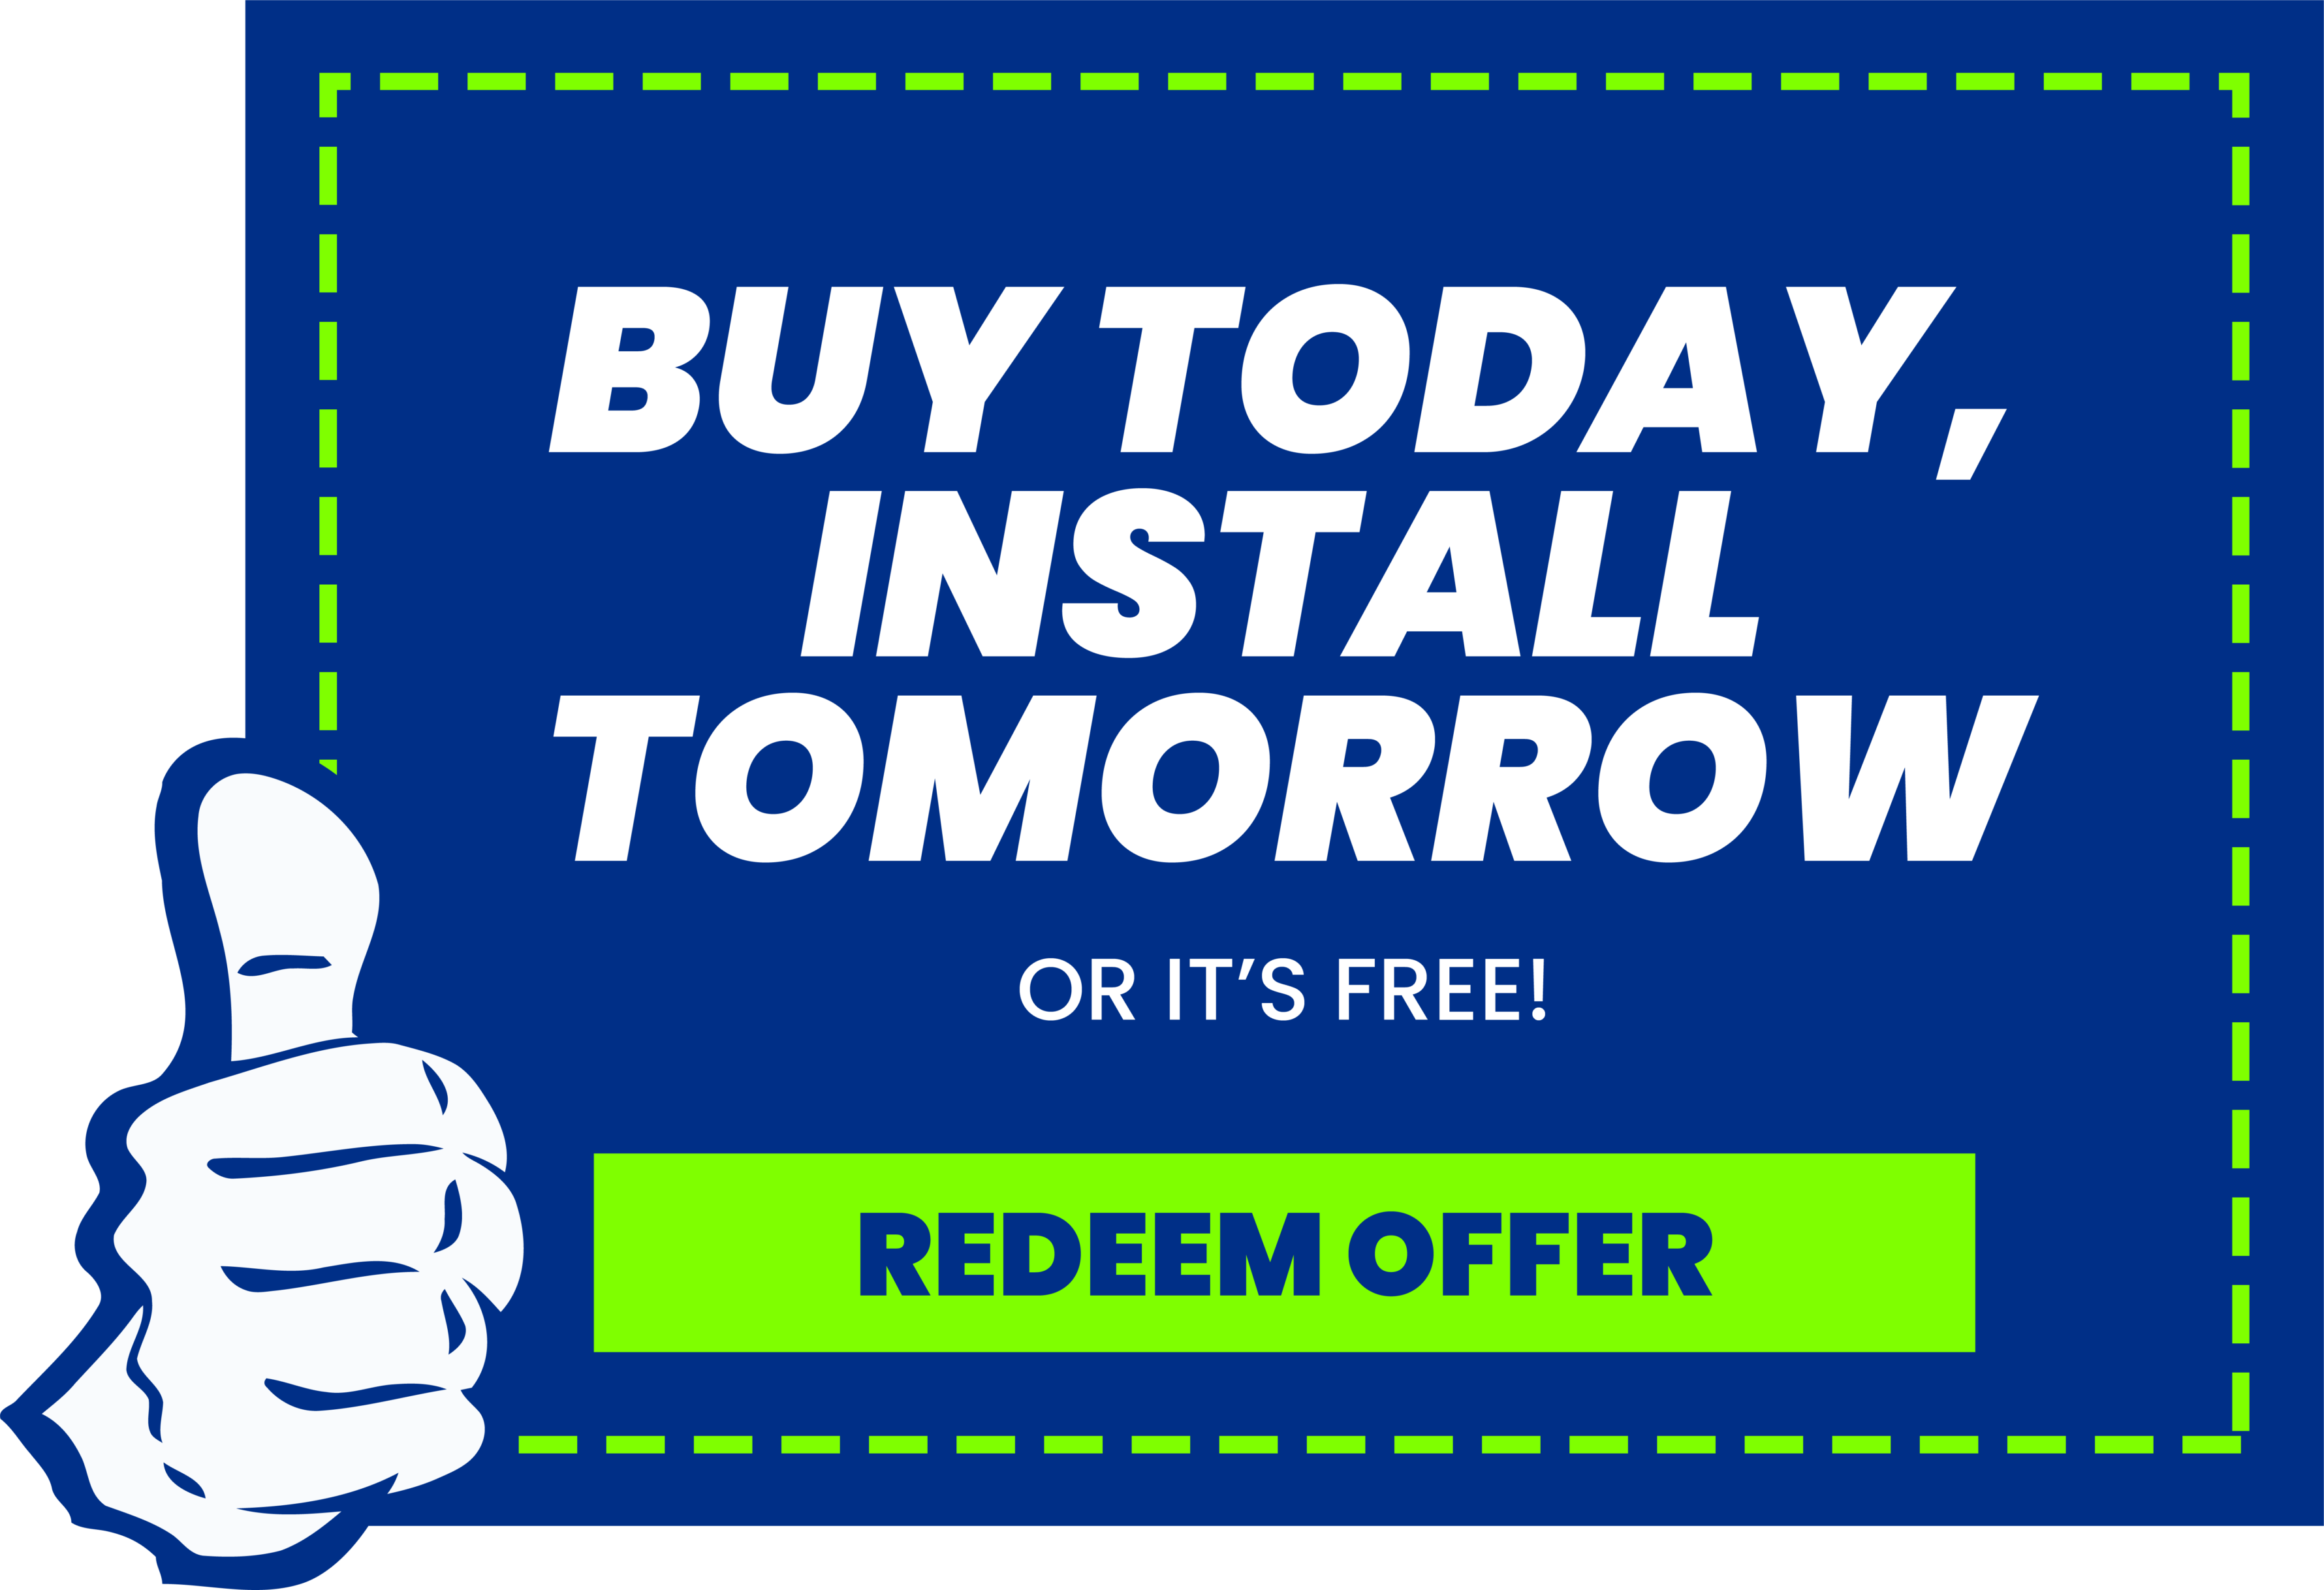 https://www.gopreferred.com/wp-content/uploads/2020/03/Buy-Today-Install-Tomorrow_Button-Coupon.png